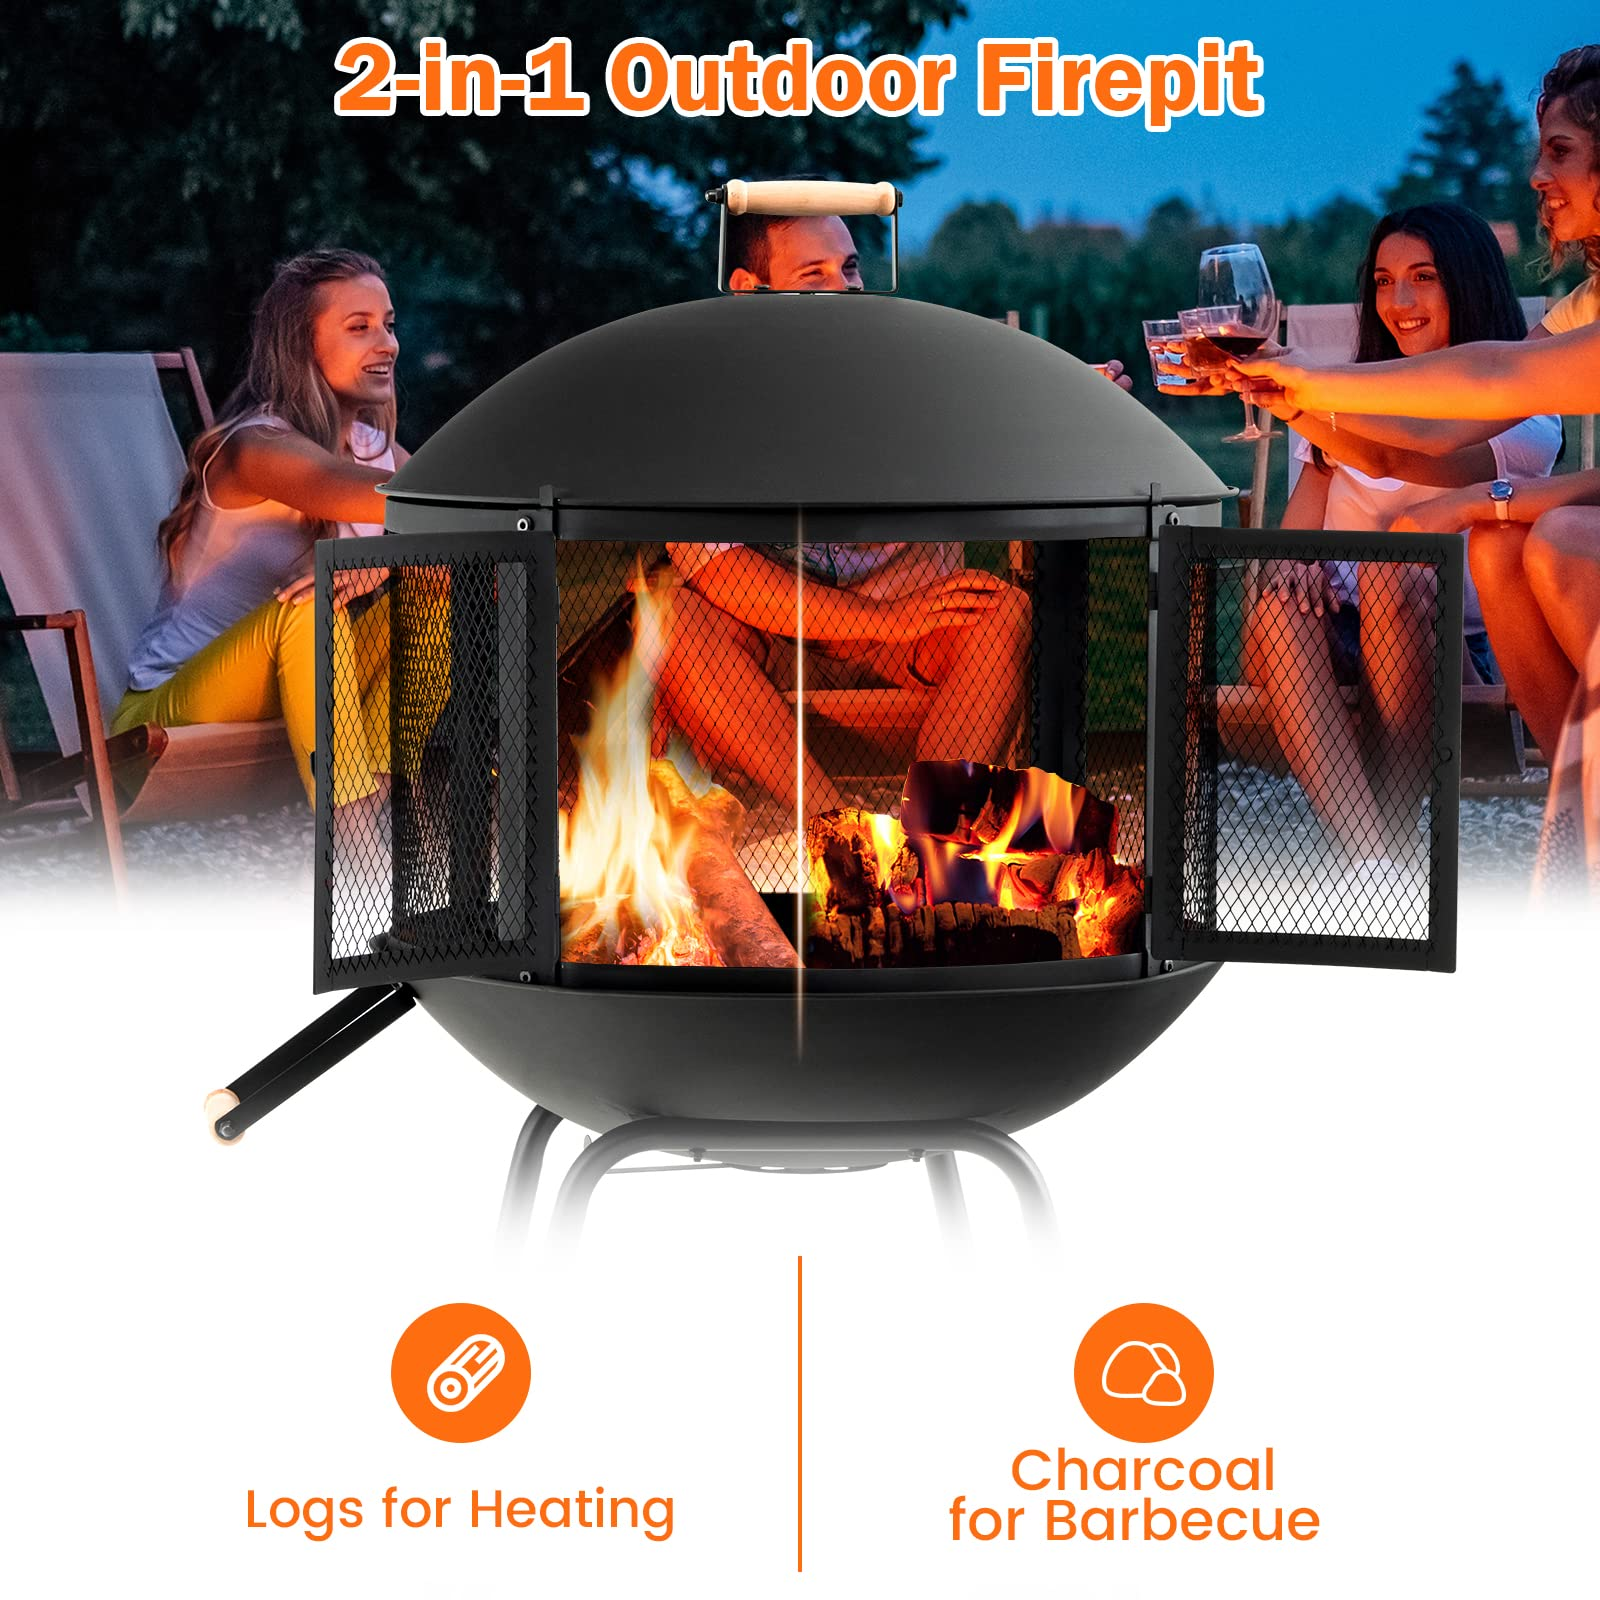 Giantex 28” Portable Fire Pit on Wheels - Mobile Wood Burning Firepit with Log Grate